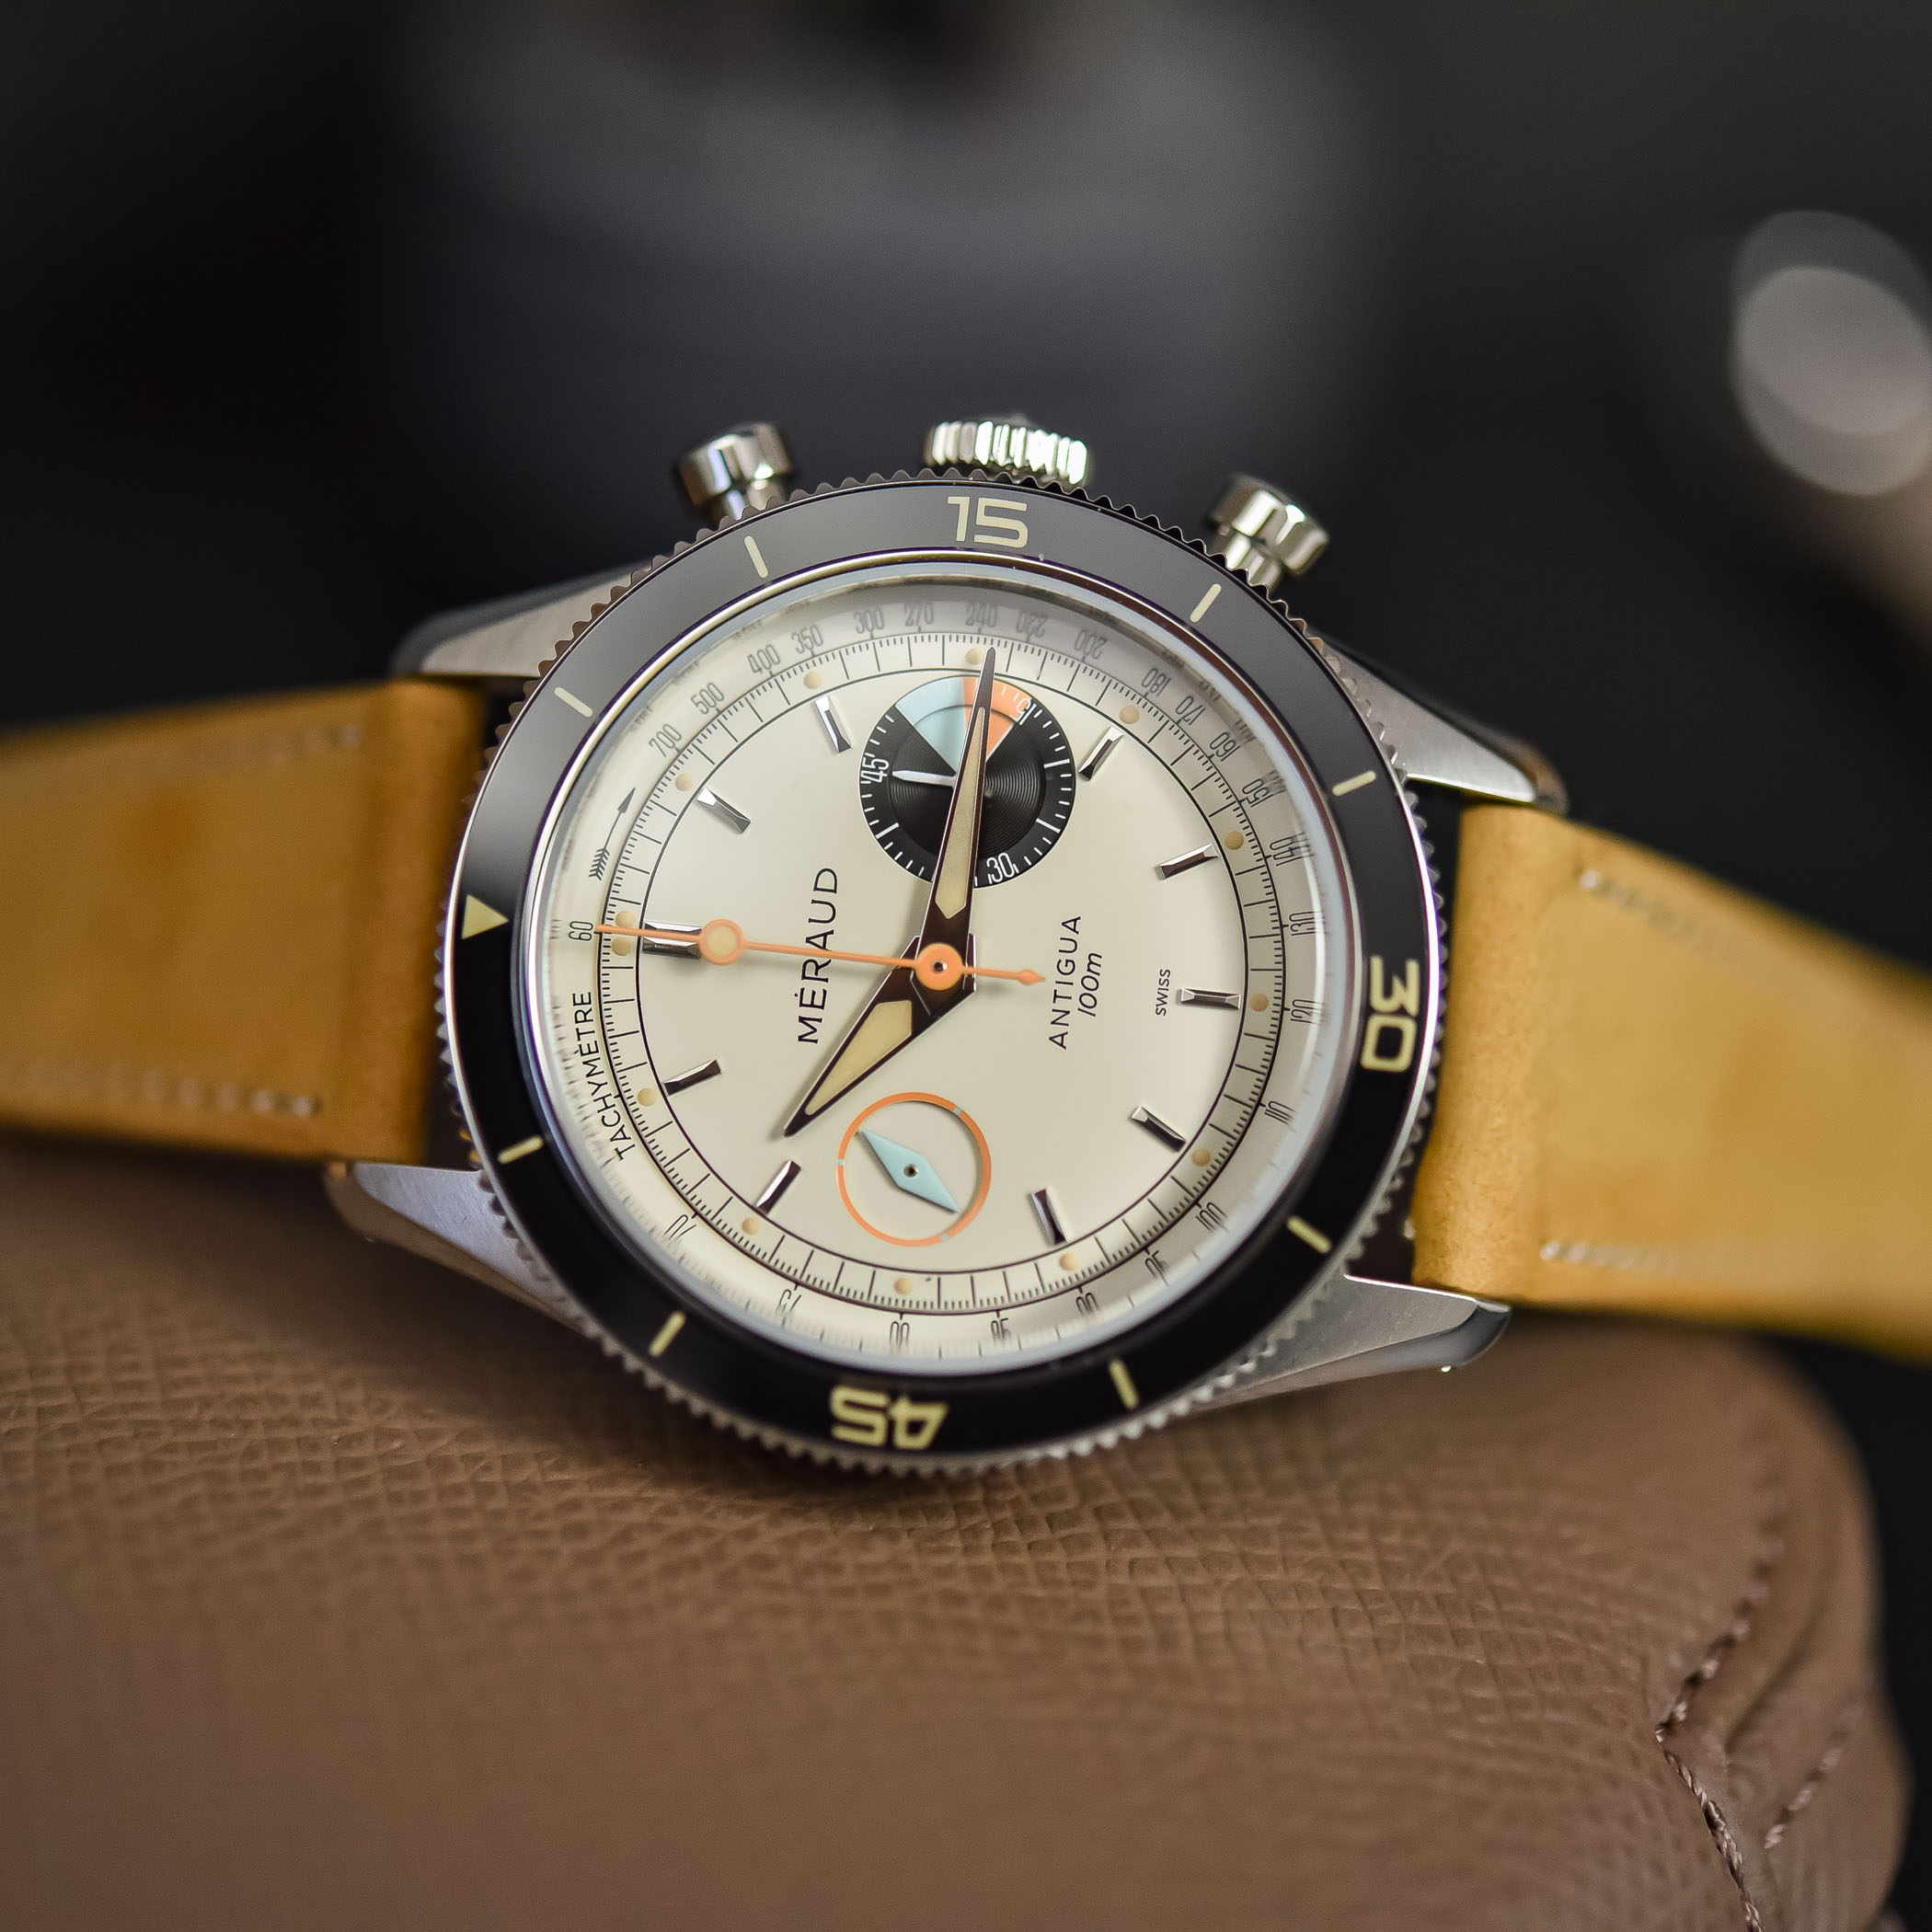 Meraud Antigua Chronograph with New Old Stock Landeron 248 Movement Restored - hands-on review - 5